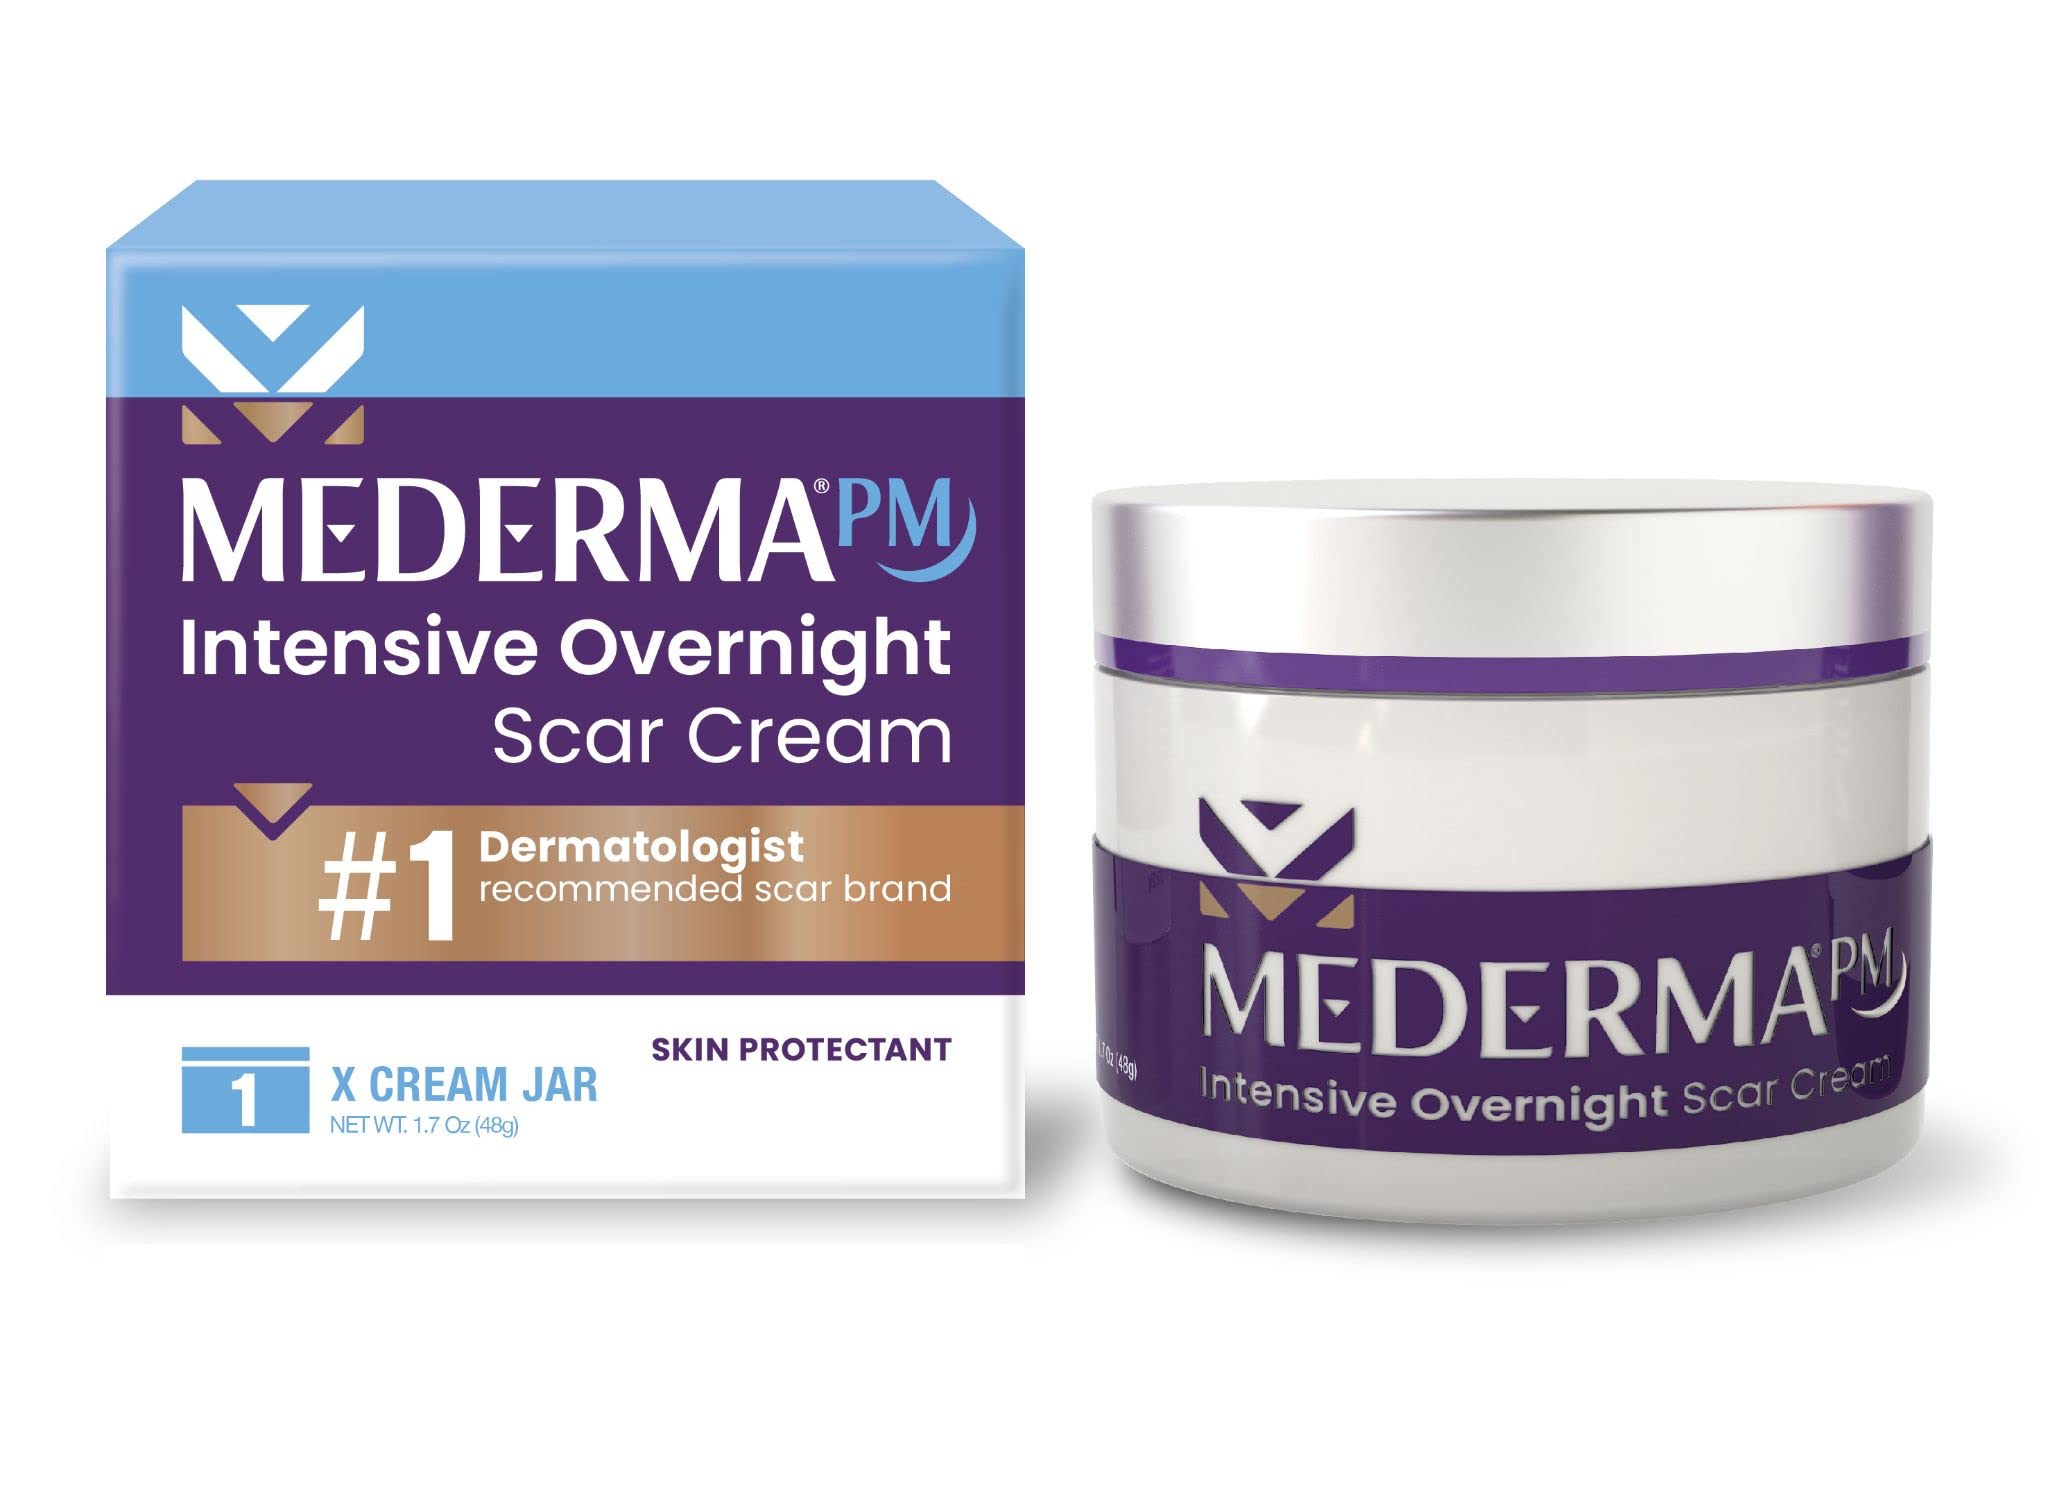 Mederma PM Intensive Overnight Scar Cream, Works with Skin's Nighttime Regenerative Activity & Quick Dry Oil, Scar and Stretch Mark Treatment